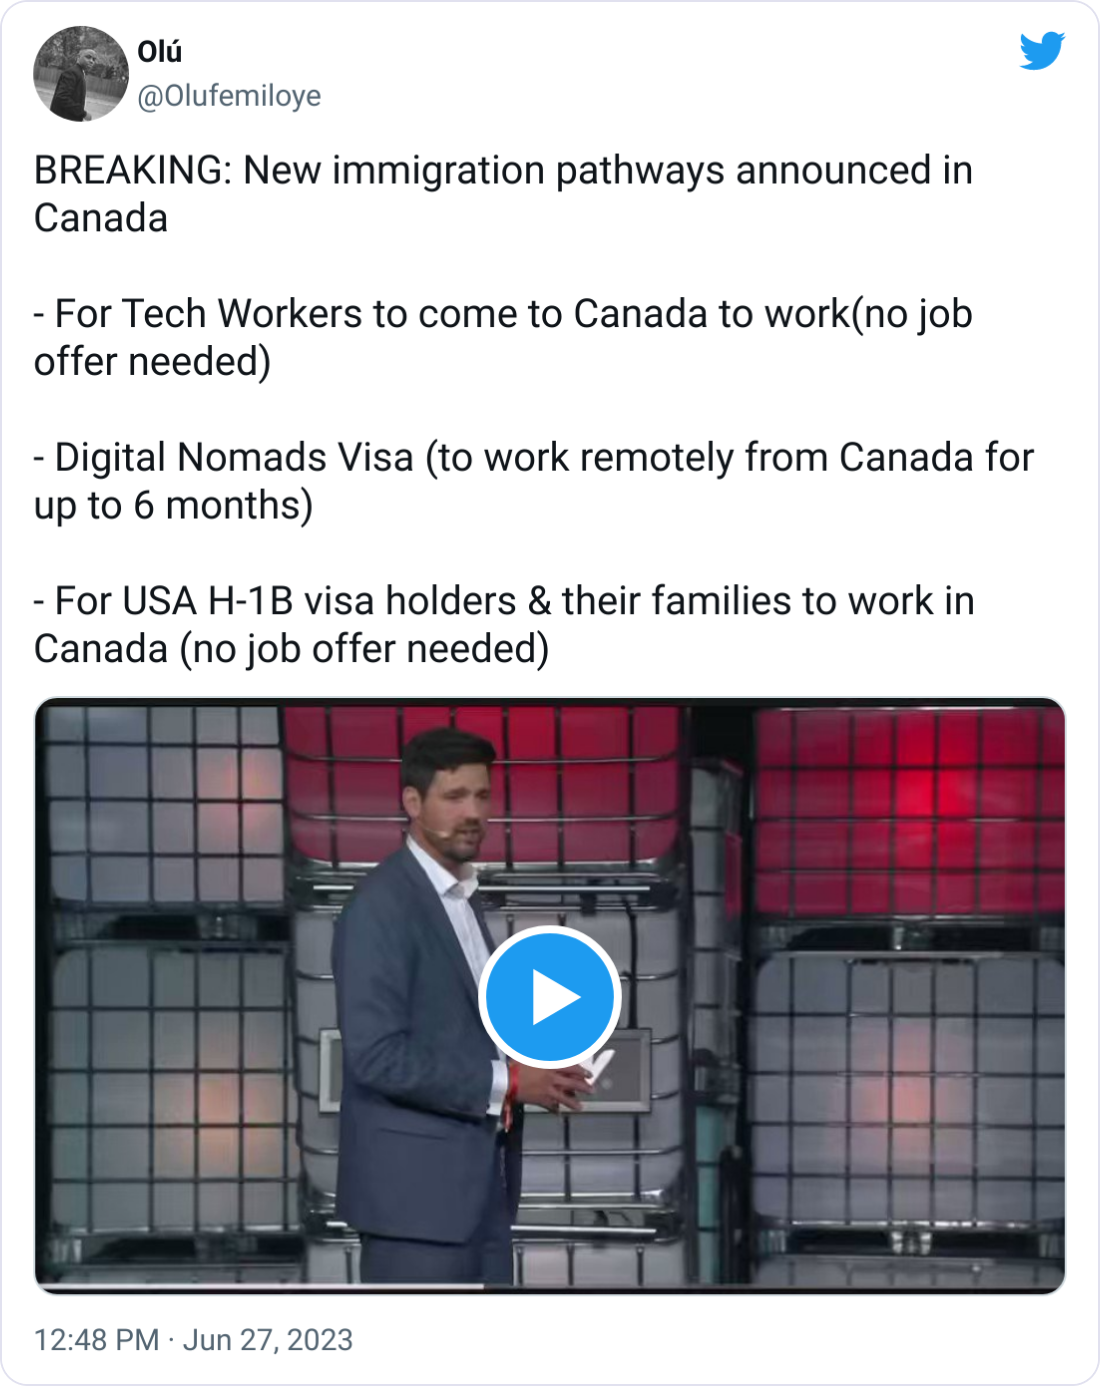 Olú @Olufemiloye BREAKING: New immigration pathways announced in Canada  - For Tech Workers to come to Canada to work(no job offer needed)  - Digital Nomads Visa (to work remotely from Canada for up to 6 months)  - For USA H-1B visa holders & their families to work in Canada (no job offer needed)